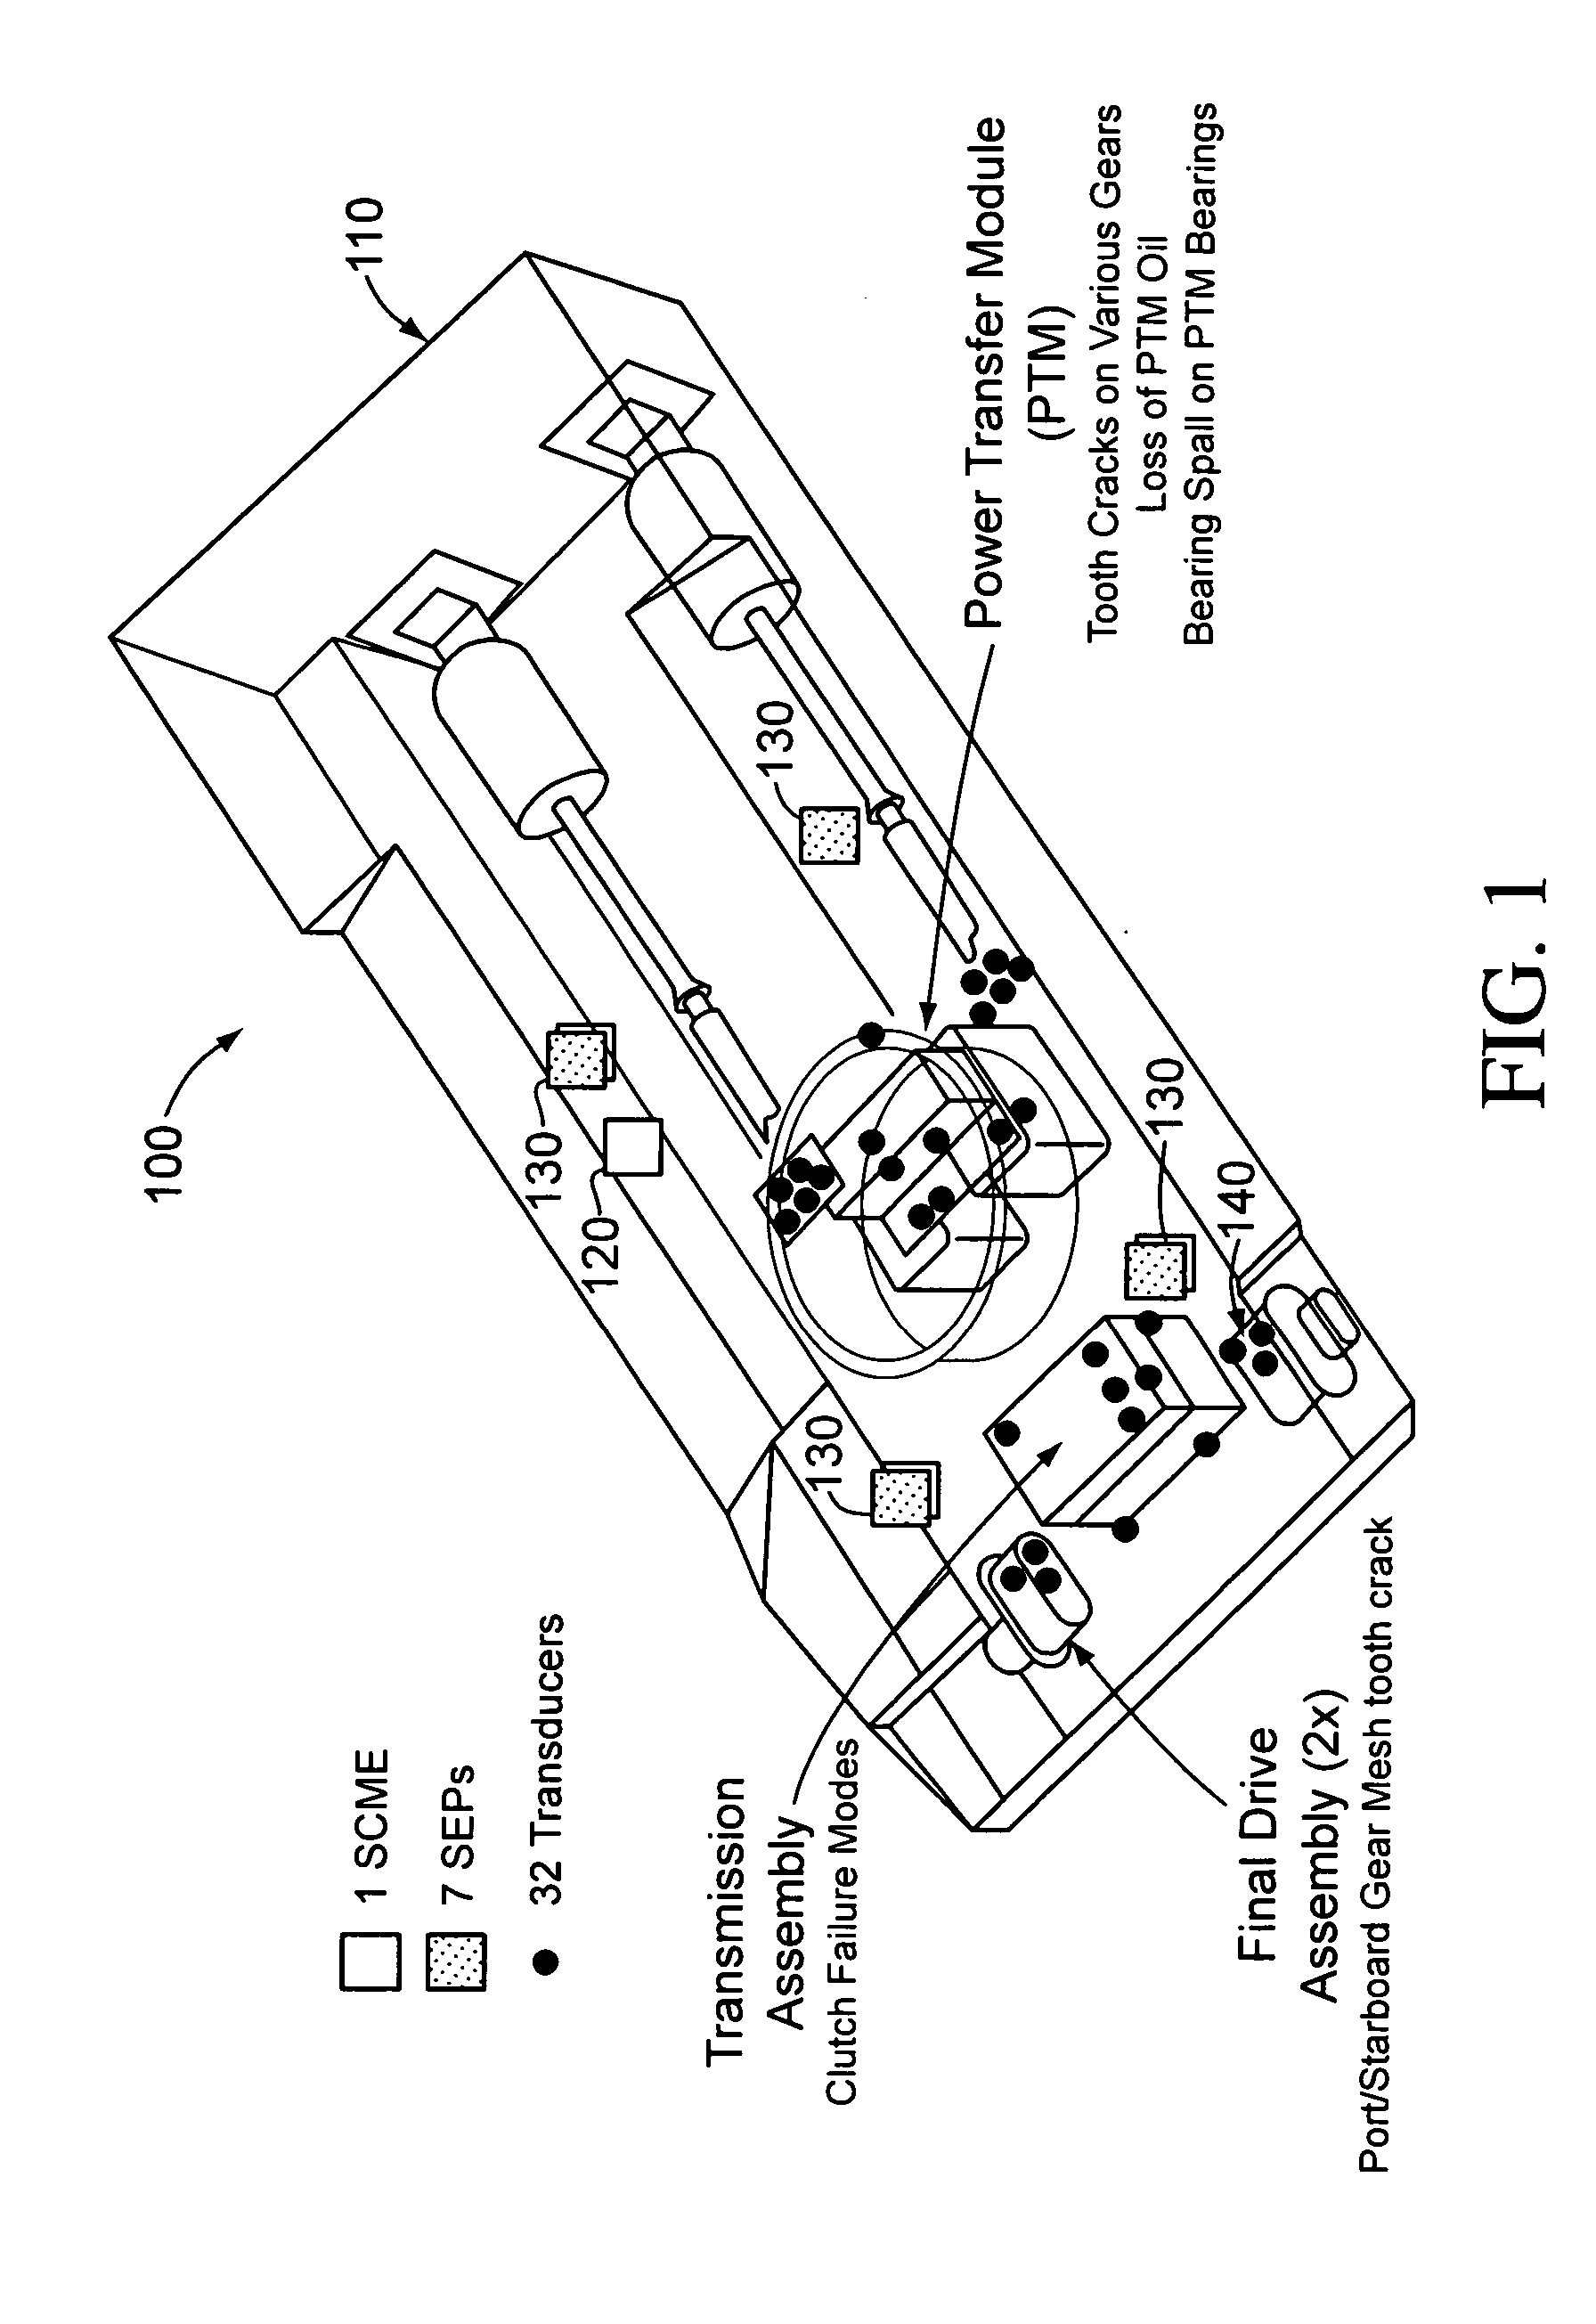 Decision support method and system